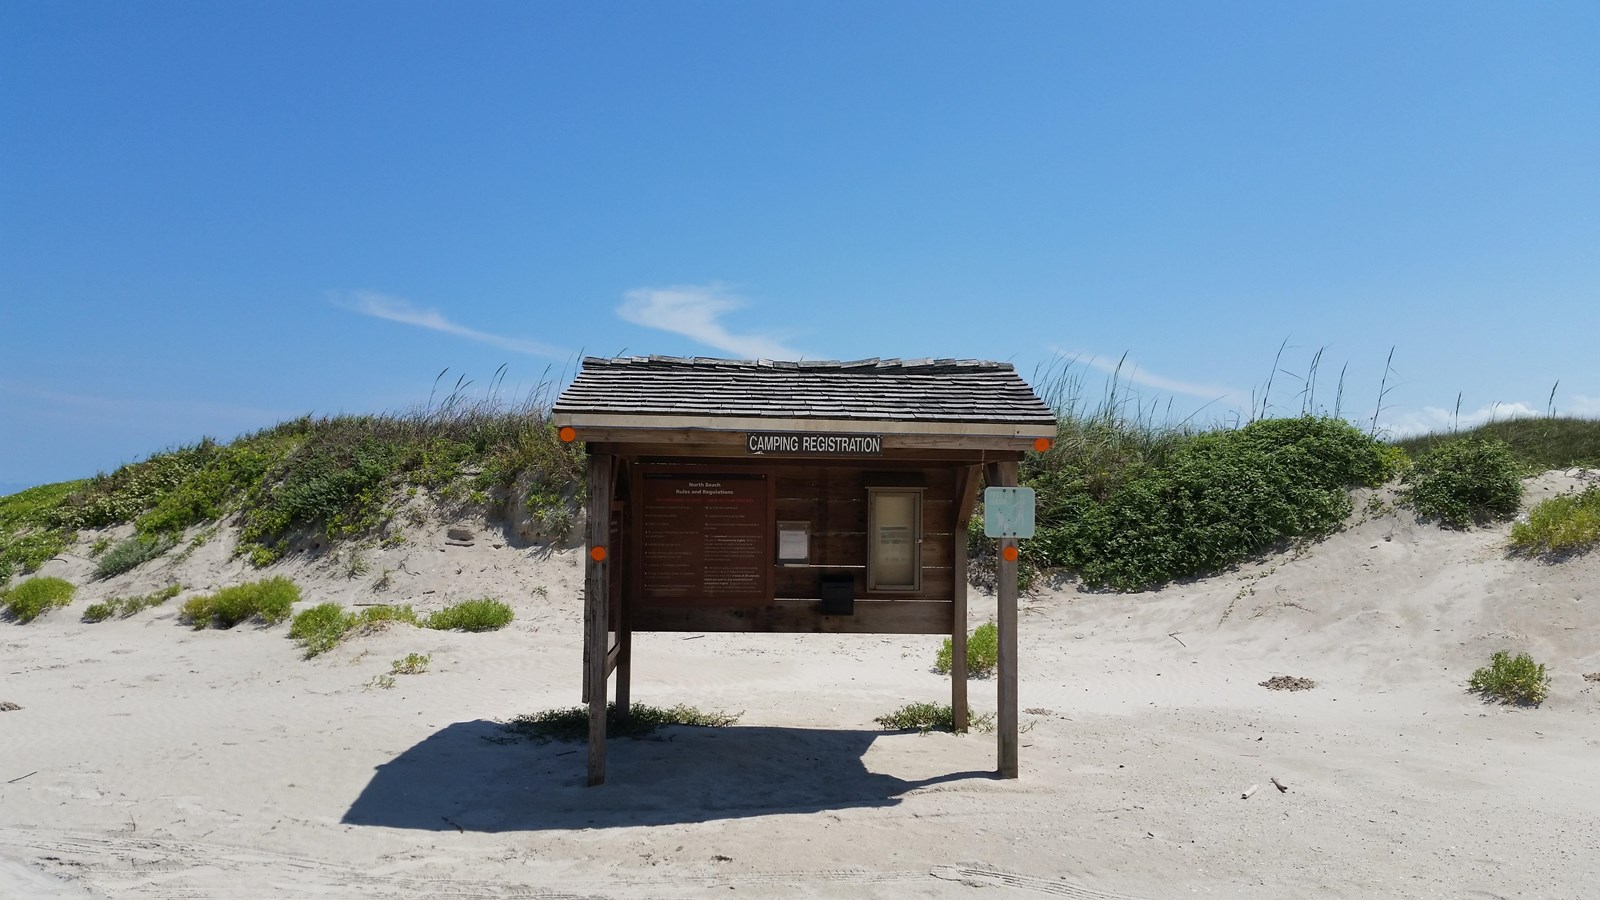 A wooden information kiosk on the beach with sand dunes behind.